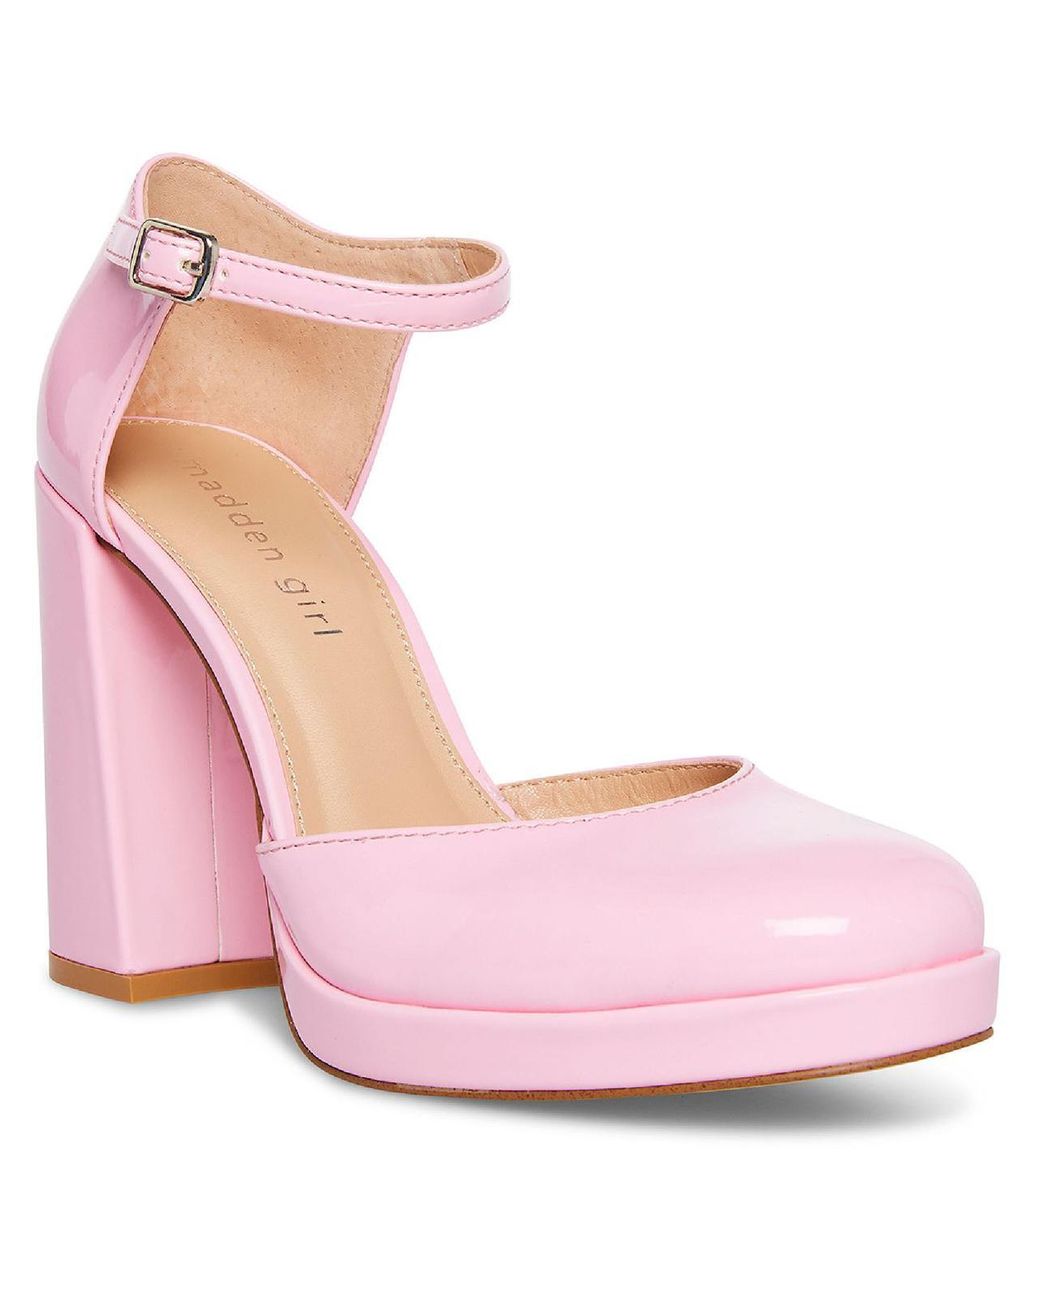 Madden Girl Unaa Faux Leather Ankle Strap Block Heels in Pink | Lyst